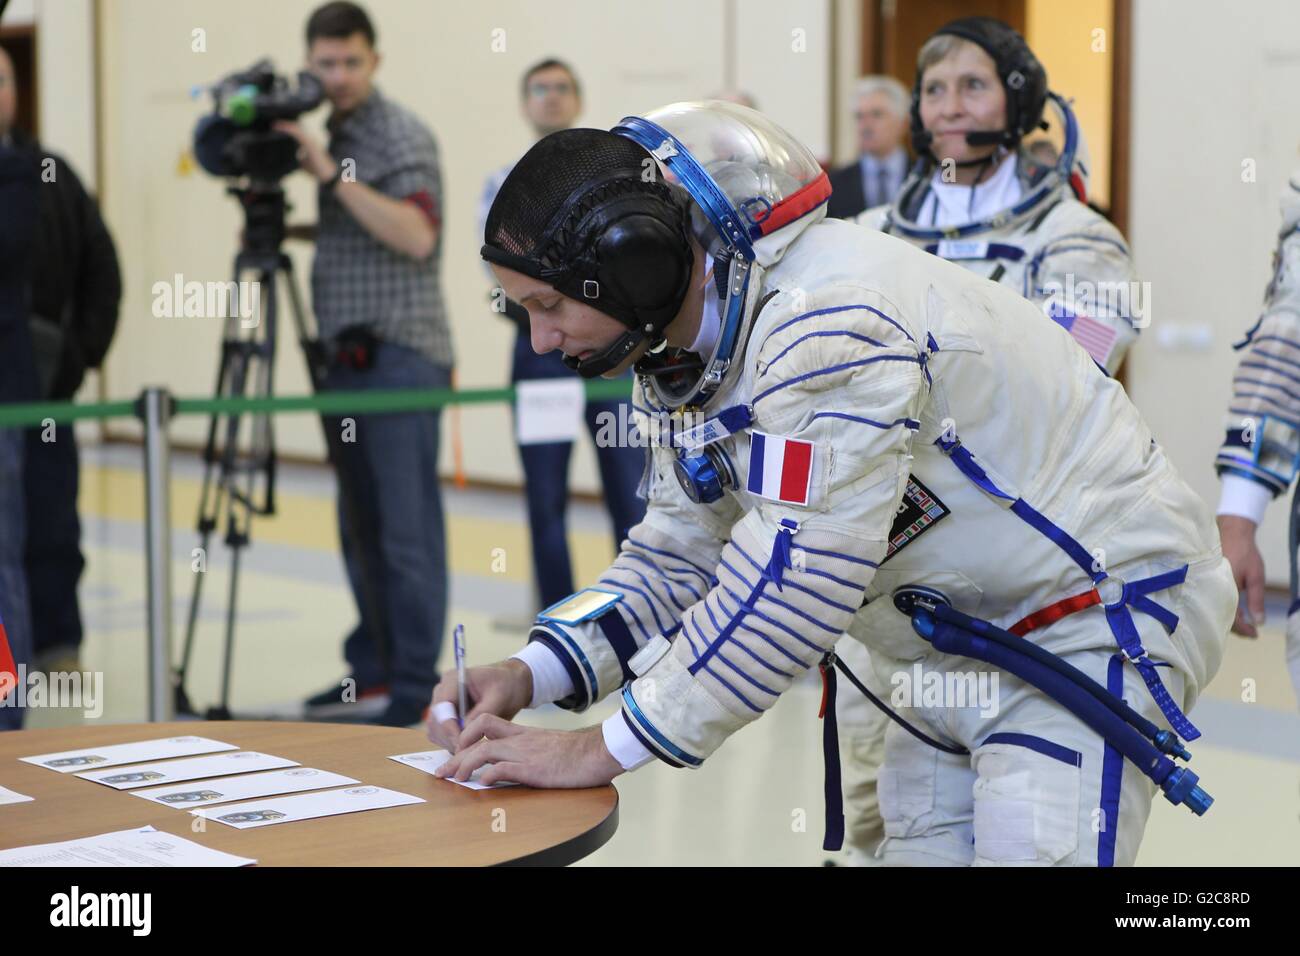 International Space Station Expedition 48 backup crew member French astronaut Thomas Pesquet signs in for the Soyuz qualification exams at the Gagarin Cosmonaut Training Center May 26, 2016 in Star City, Russia. Stock Photo